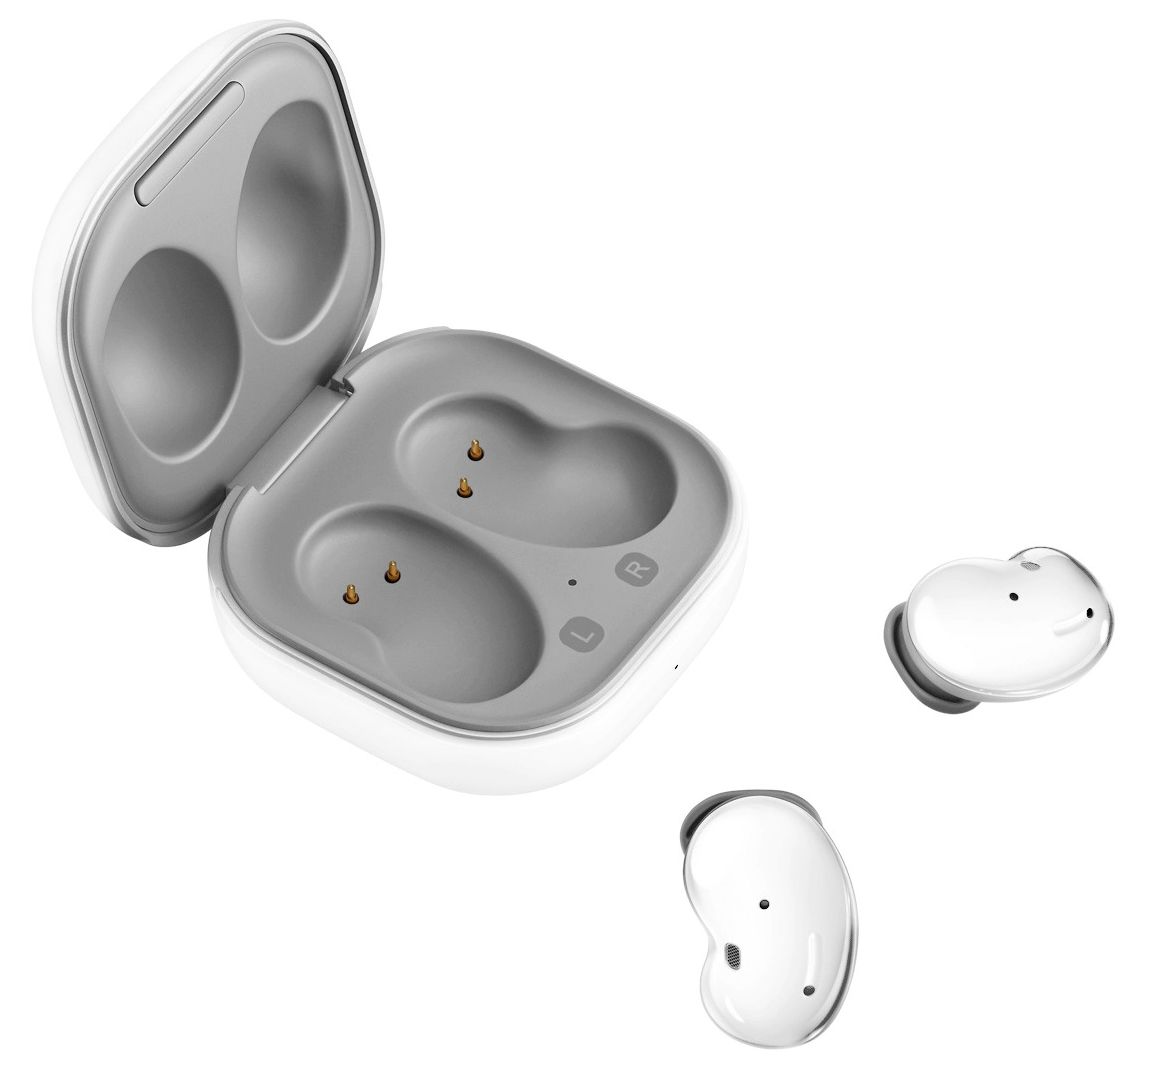 The Galaxy Buds Live are Samsung's previous-generation ANC earbuds with a bean-shaped design.